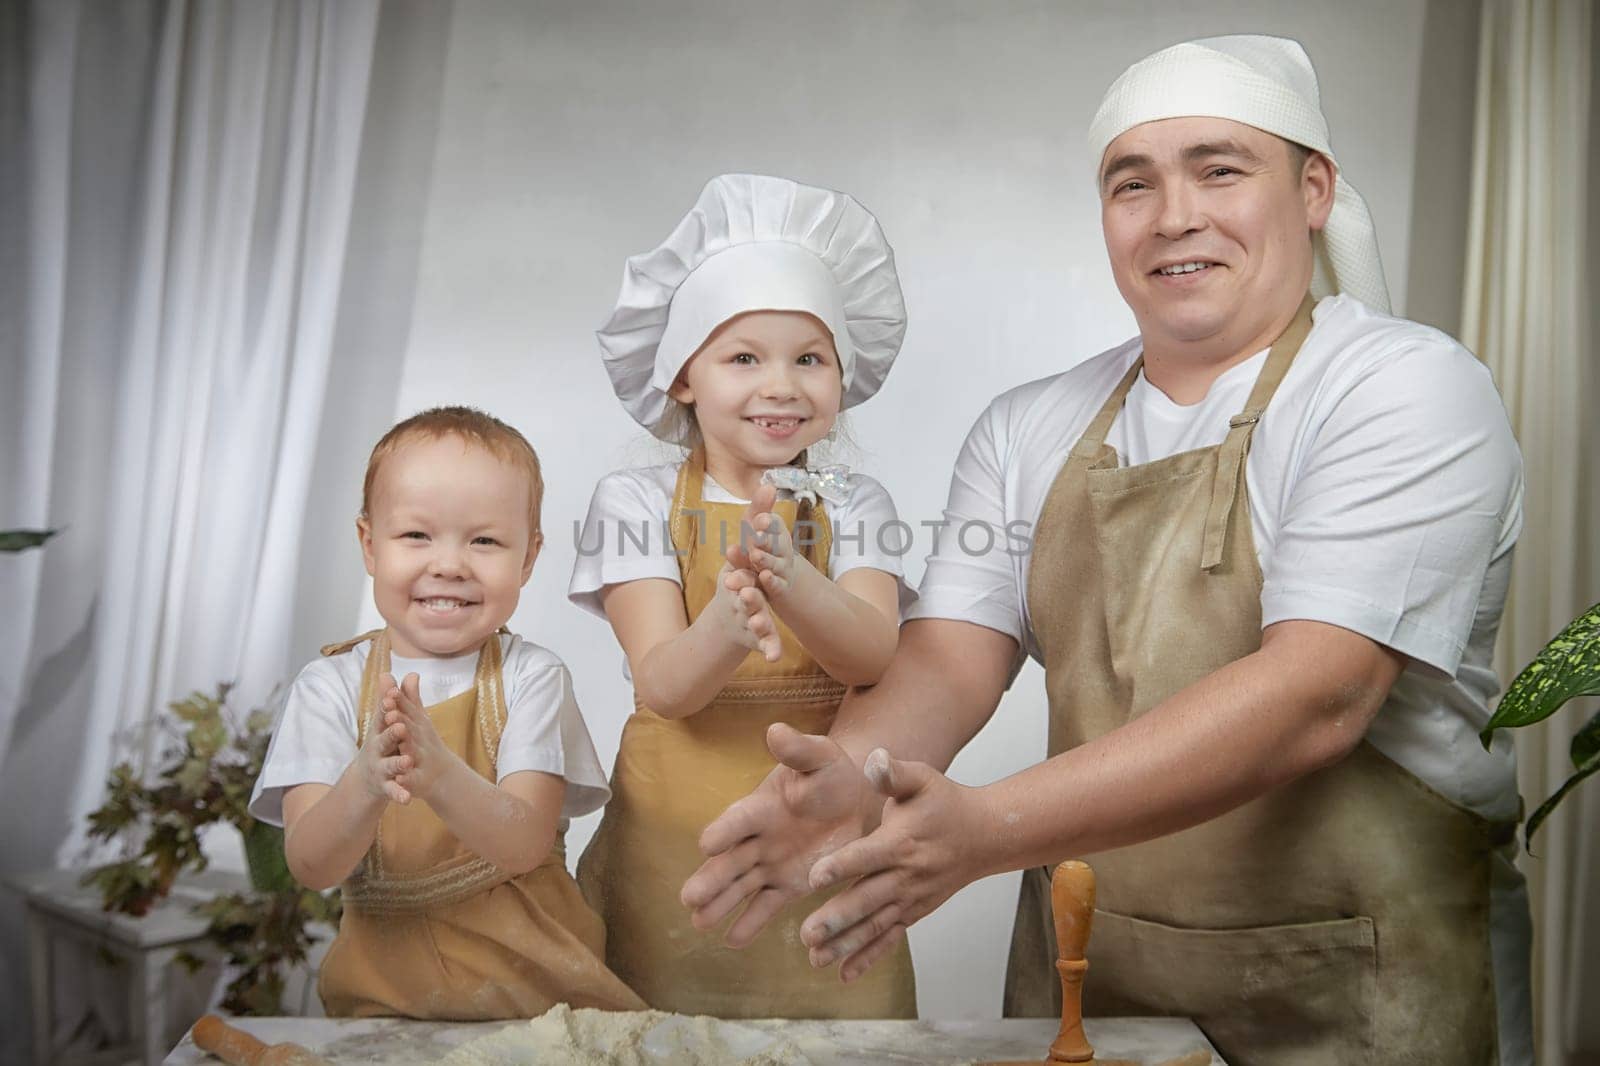 Cute oriental family with father, daughter, son cooking in kitchen on Ramadan, Kurban-Bairam, Eid al-Adha. Funny family at a cook photo shoot. Pancakes, pastries, Maslenitsa, Easter